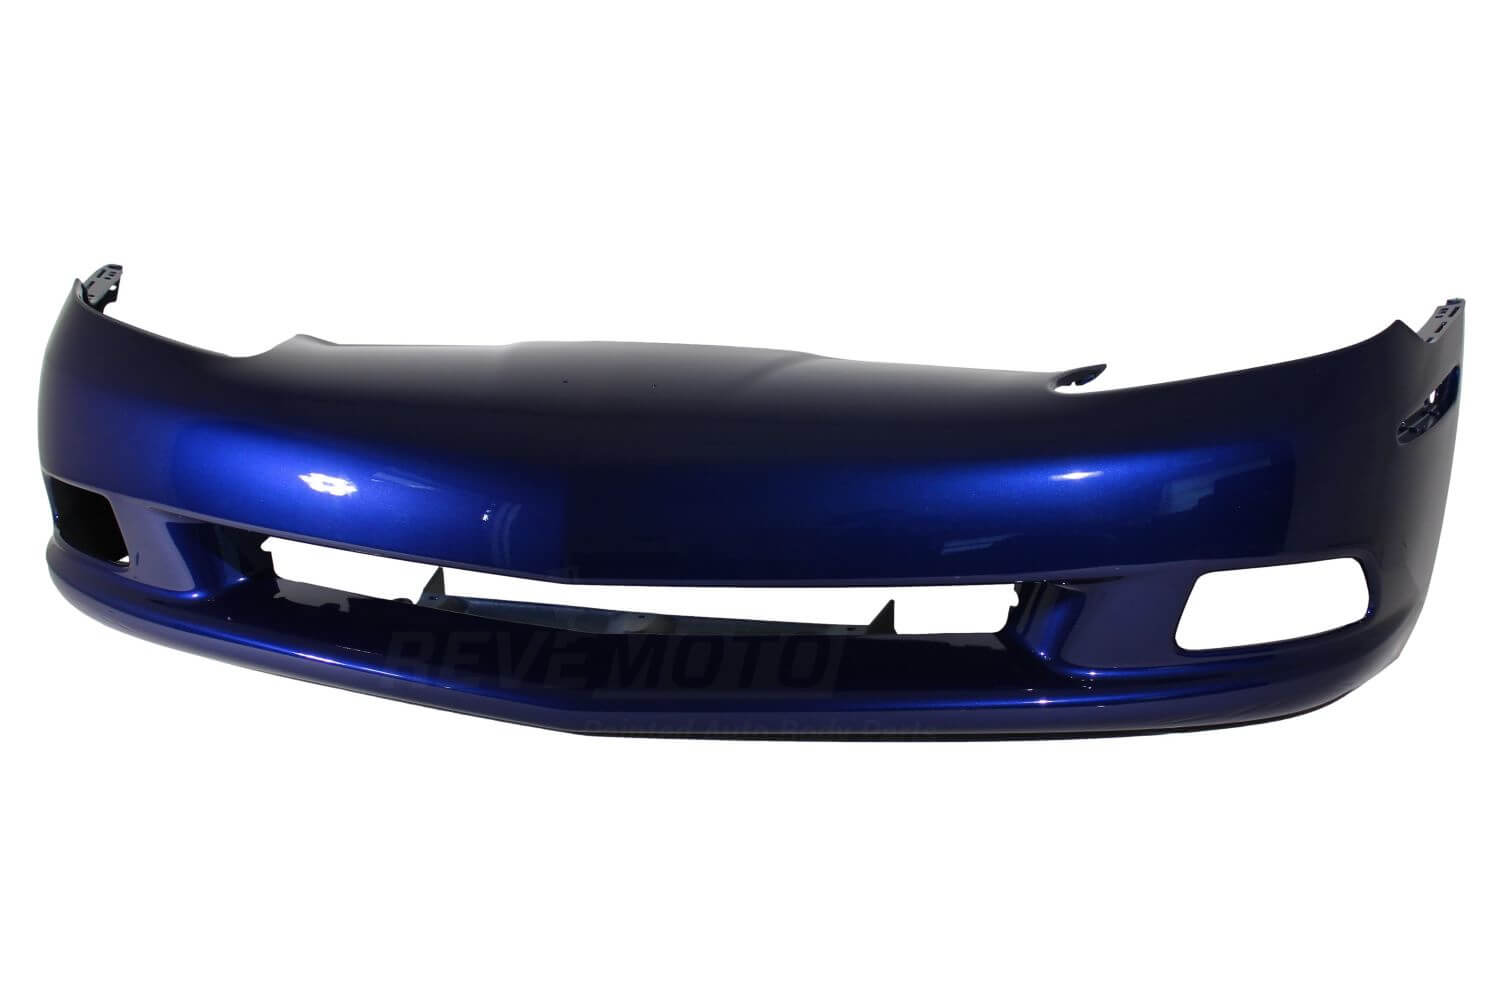 2005-2013 Chevrolet Corvette Front Bumper Painted Luxo Blue Metallic (WA933L) Without headlight washer holes (1)